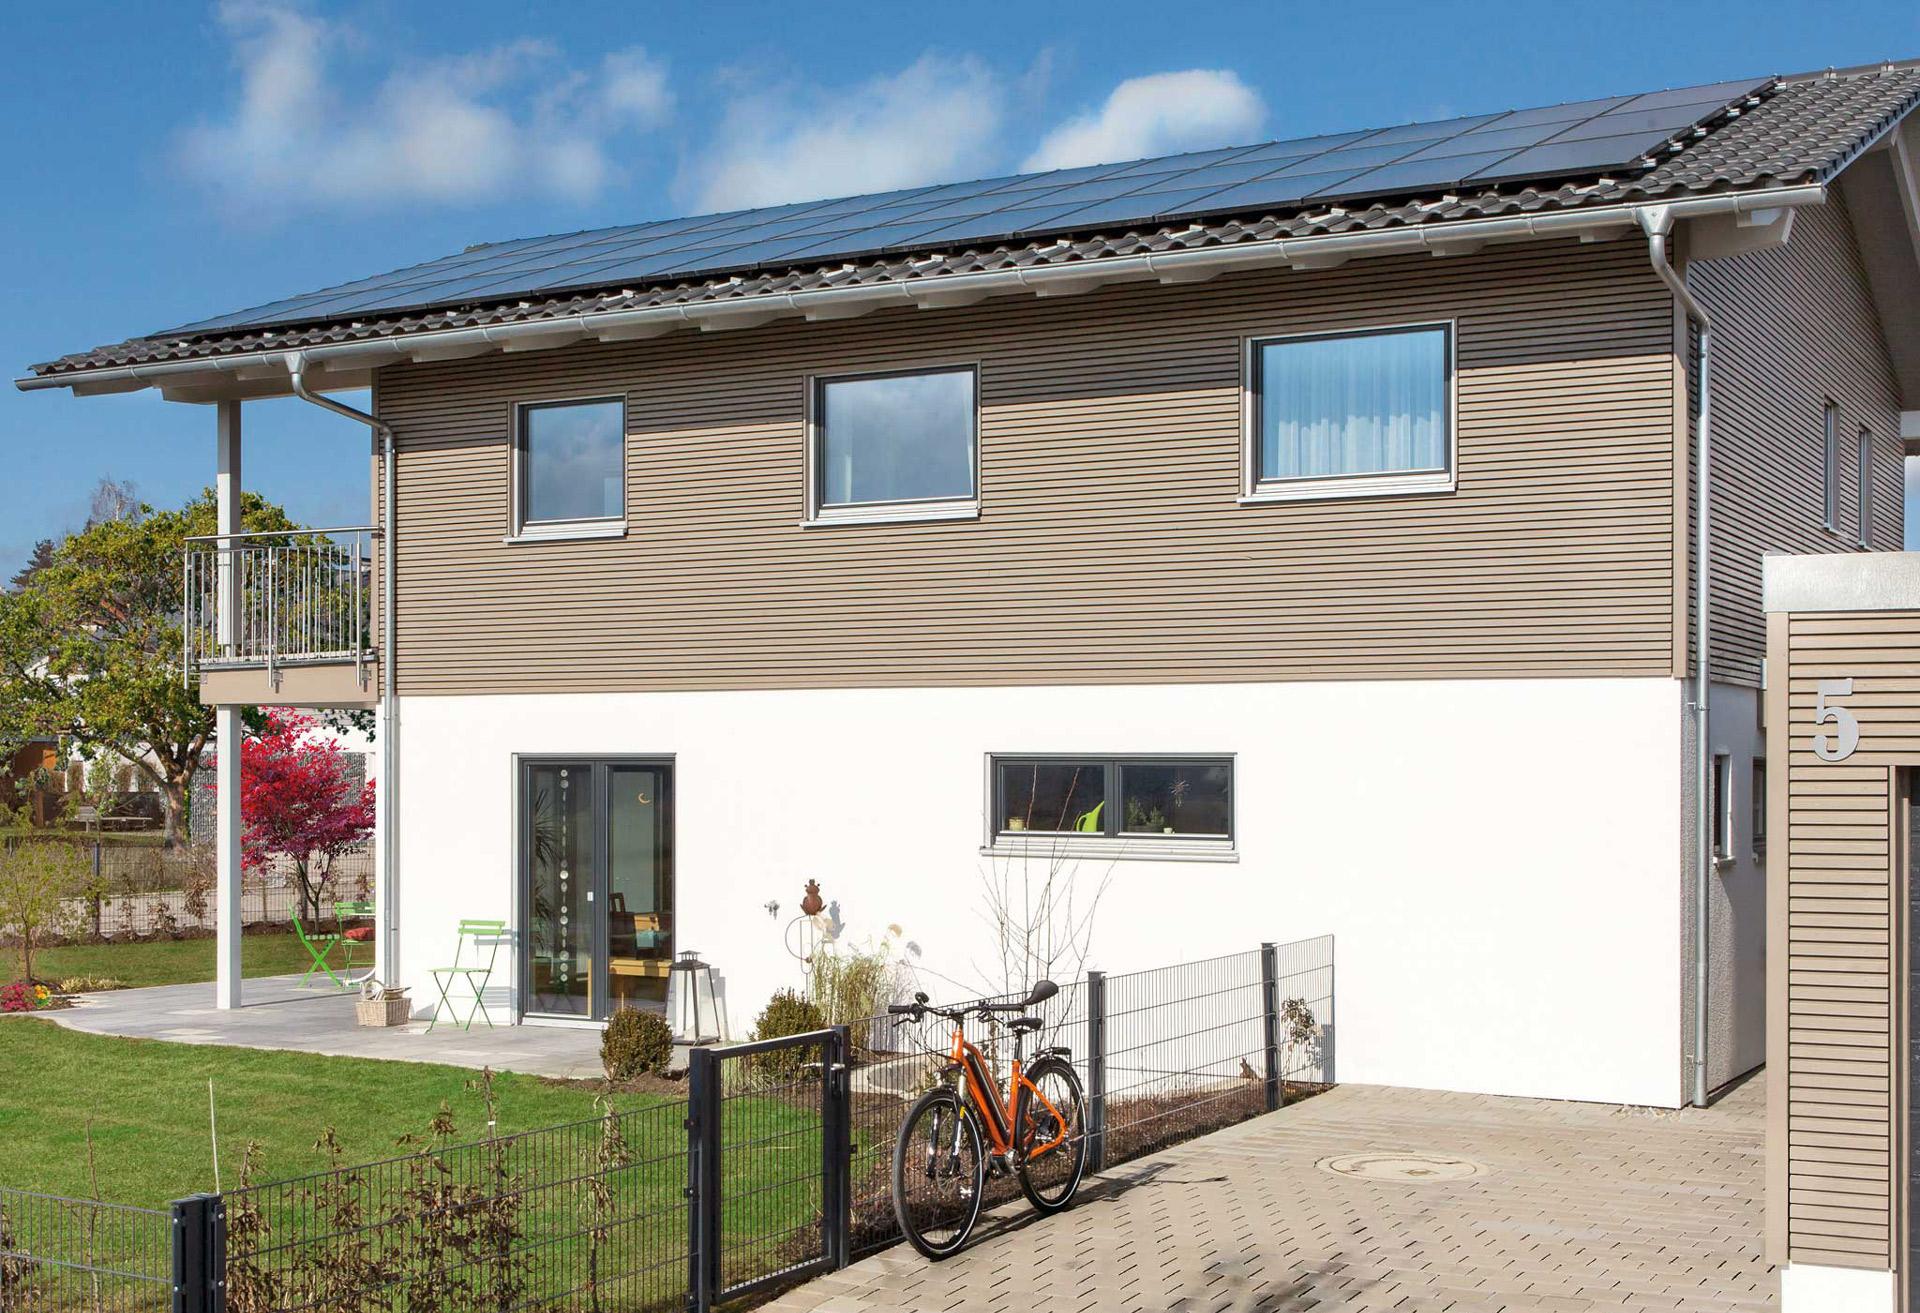 Energy efficiency house with photovoltaic system and energy storage